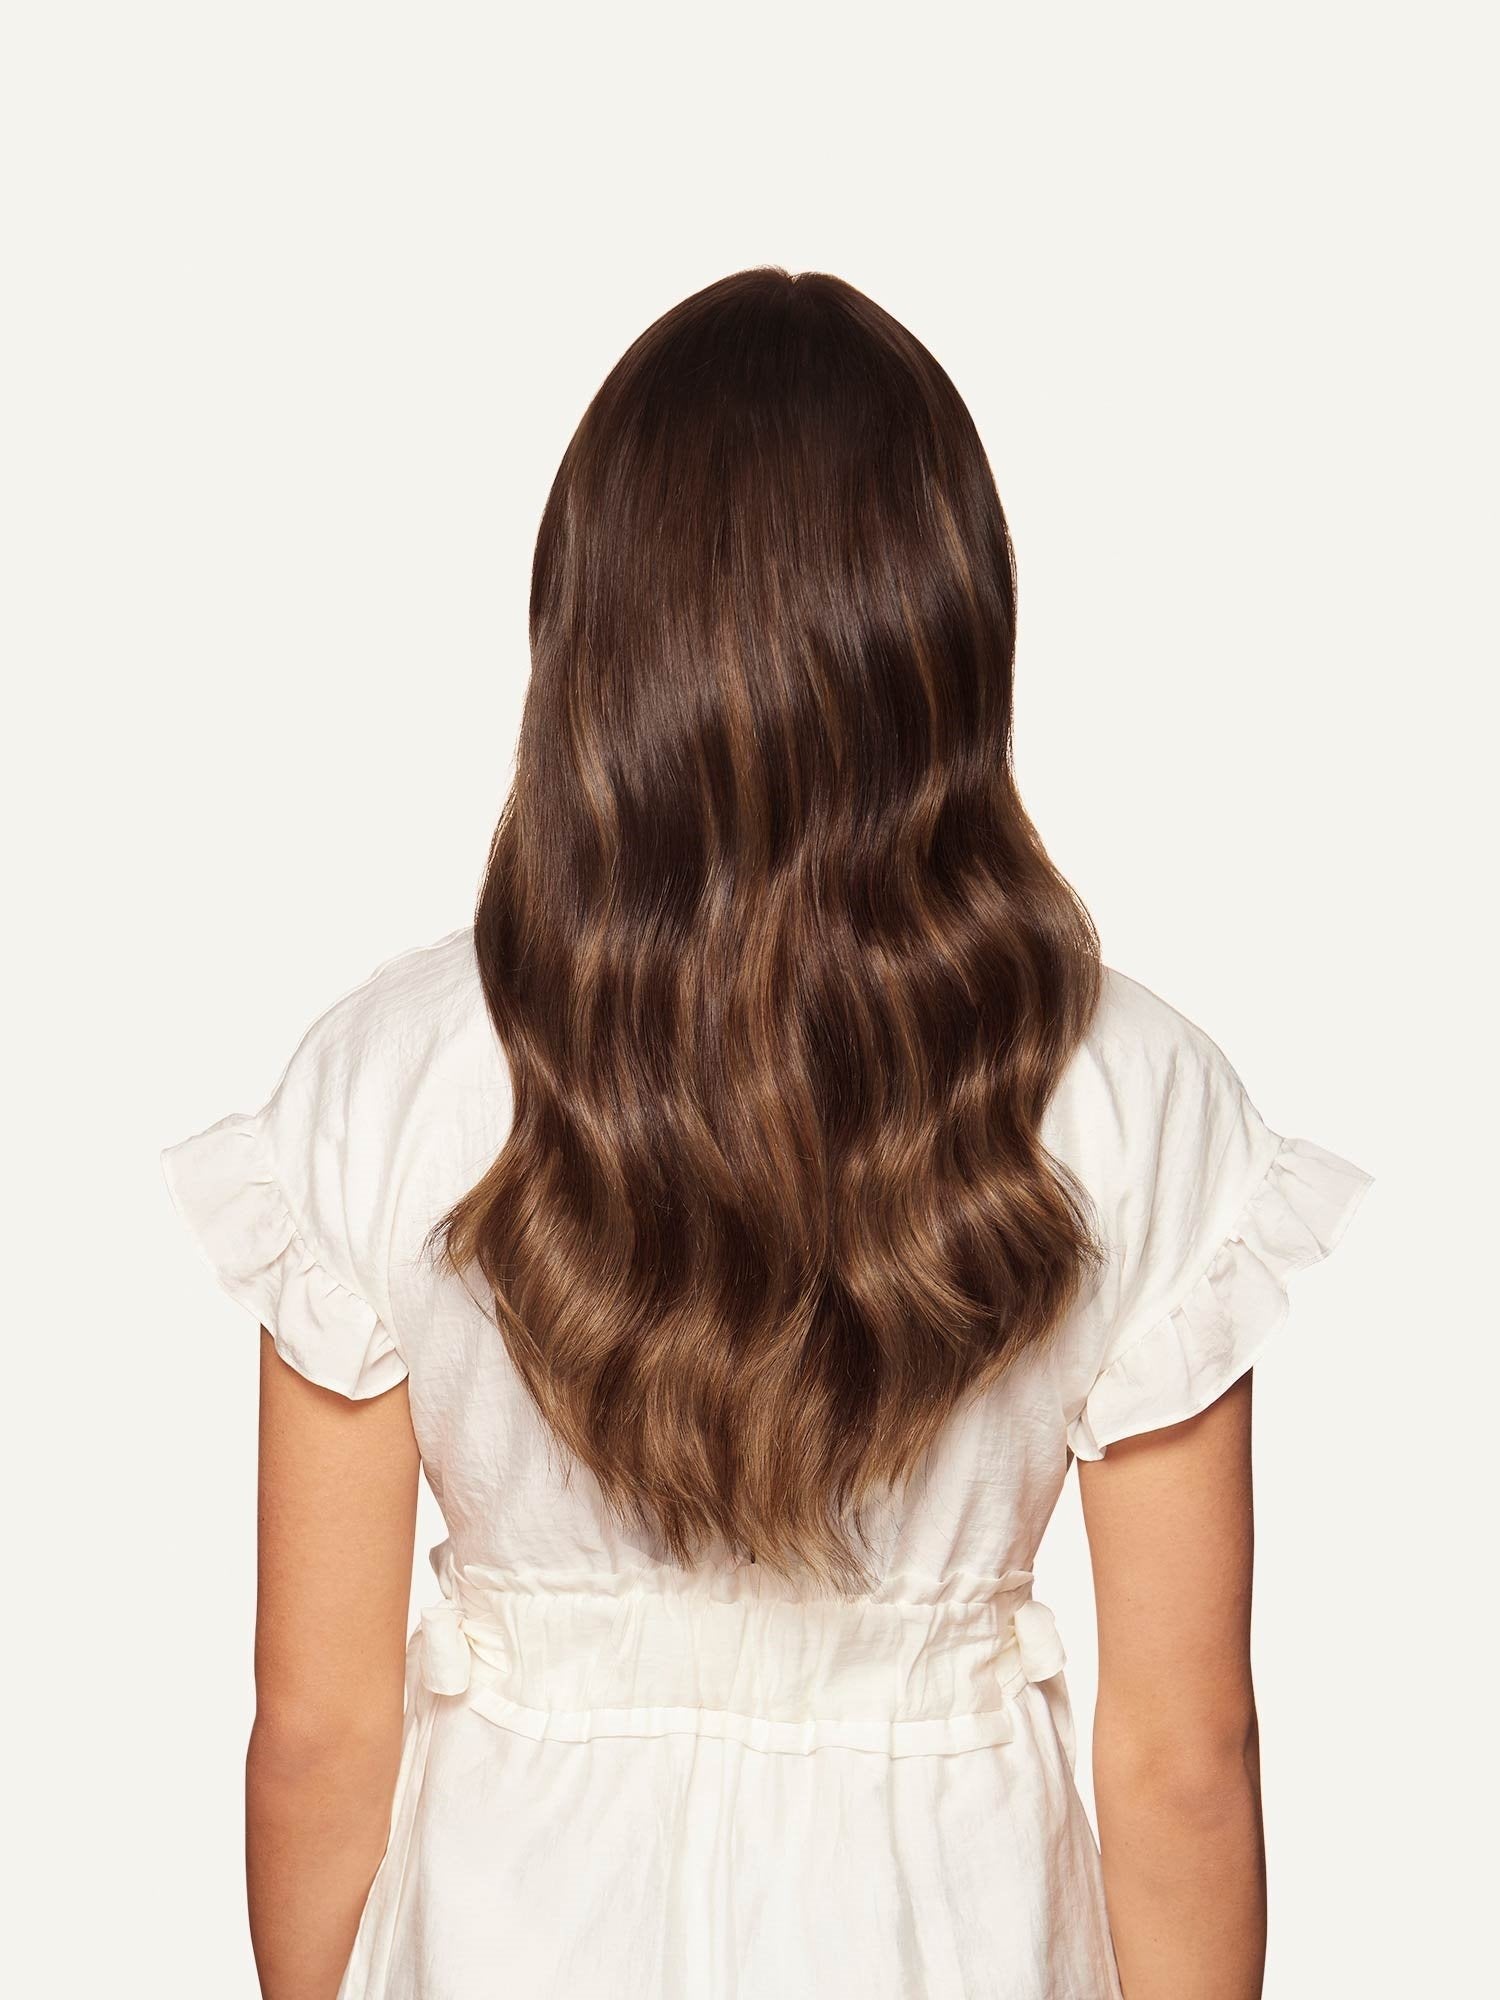 Invisible Seamless Halo Hair Extensions - Chocolate Brown Balayage - SashBeauty